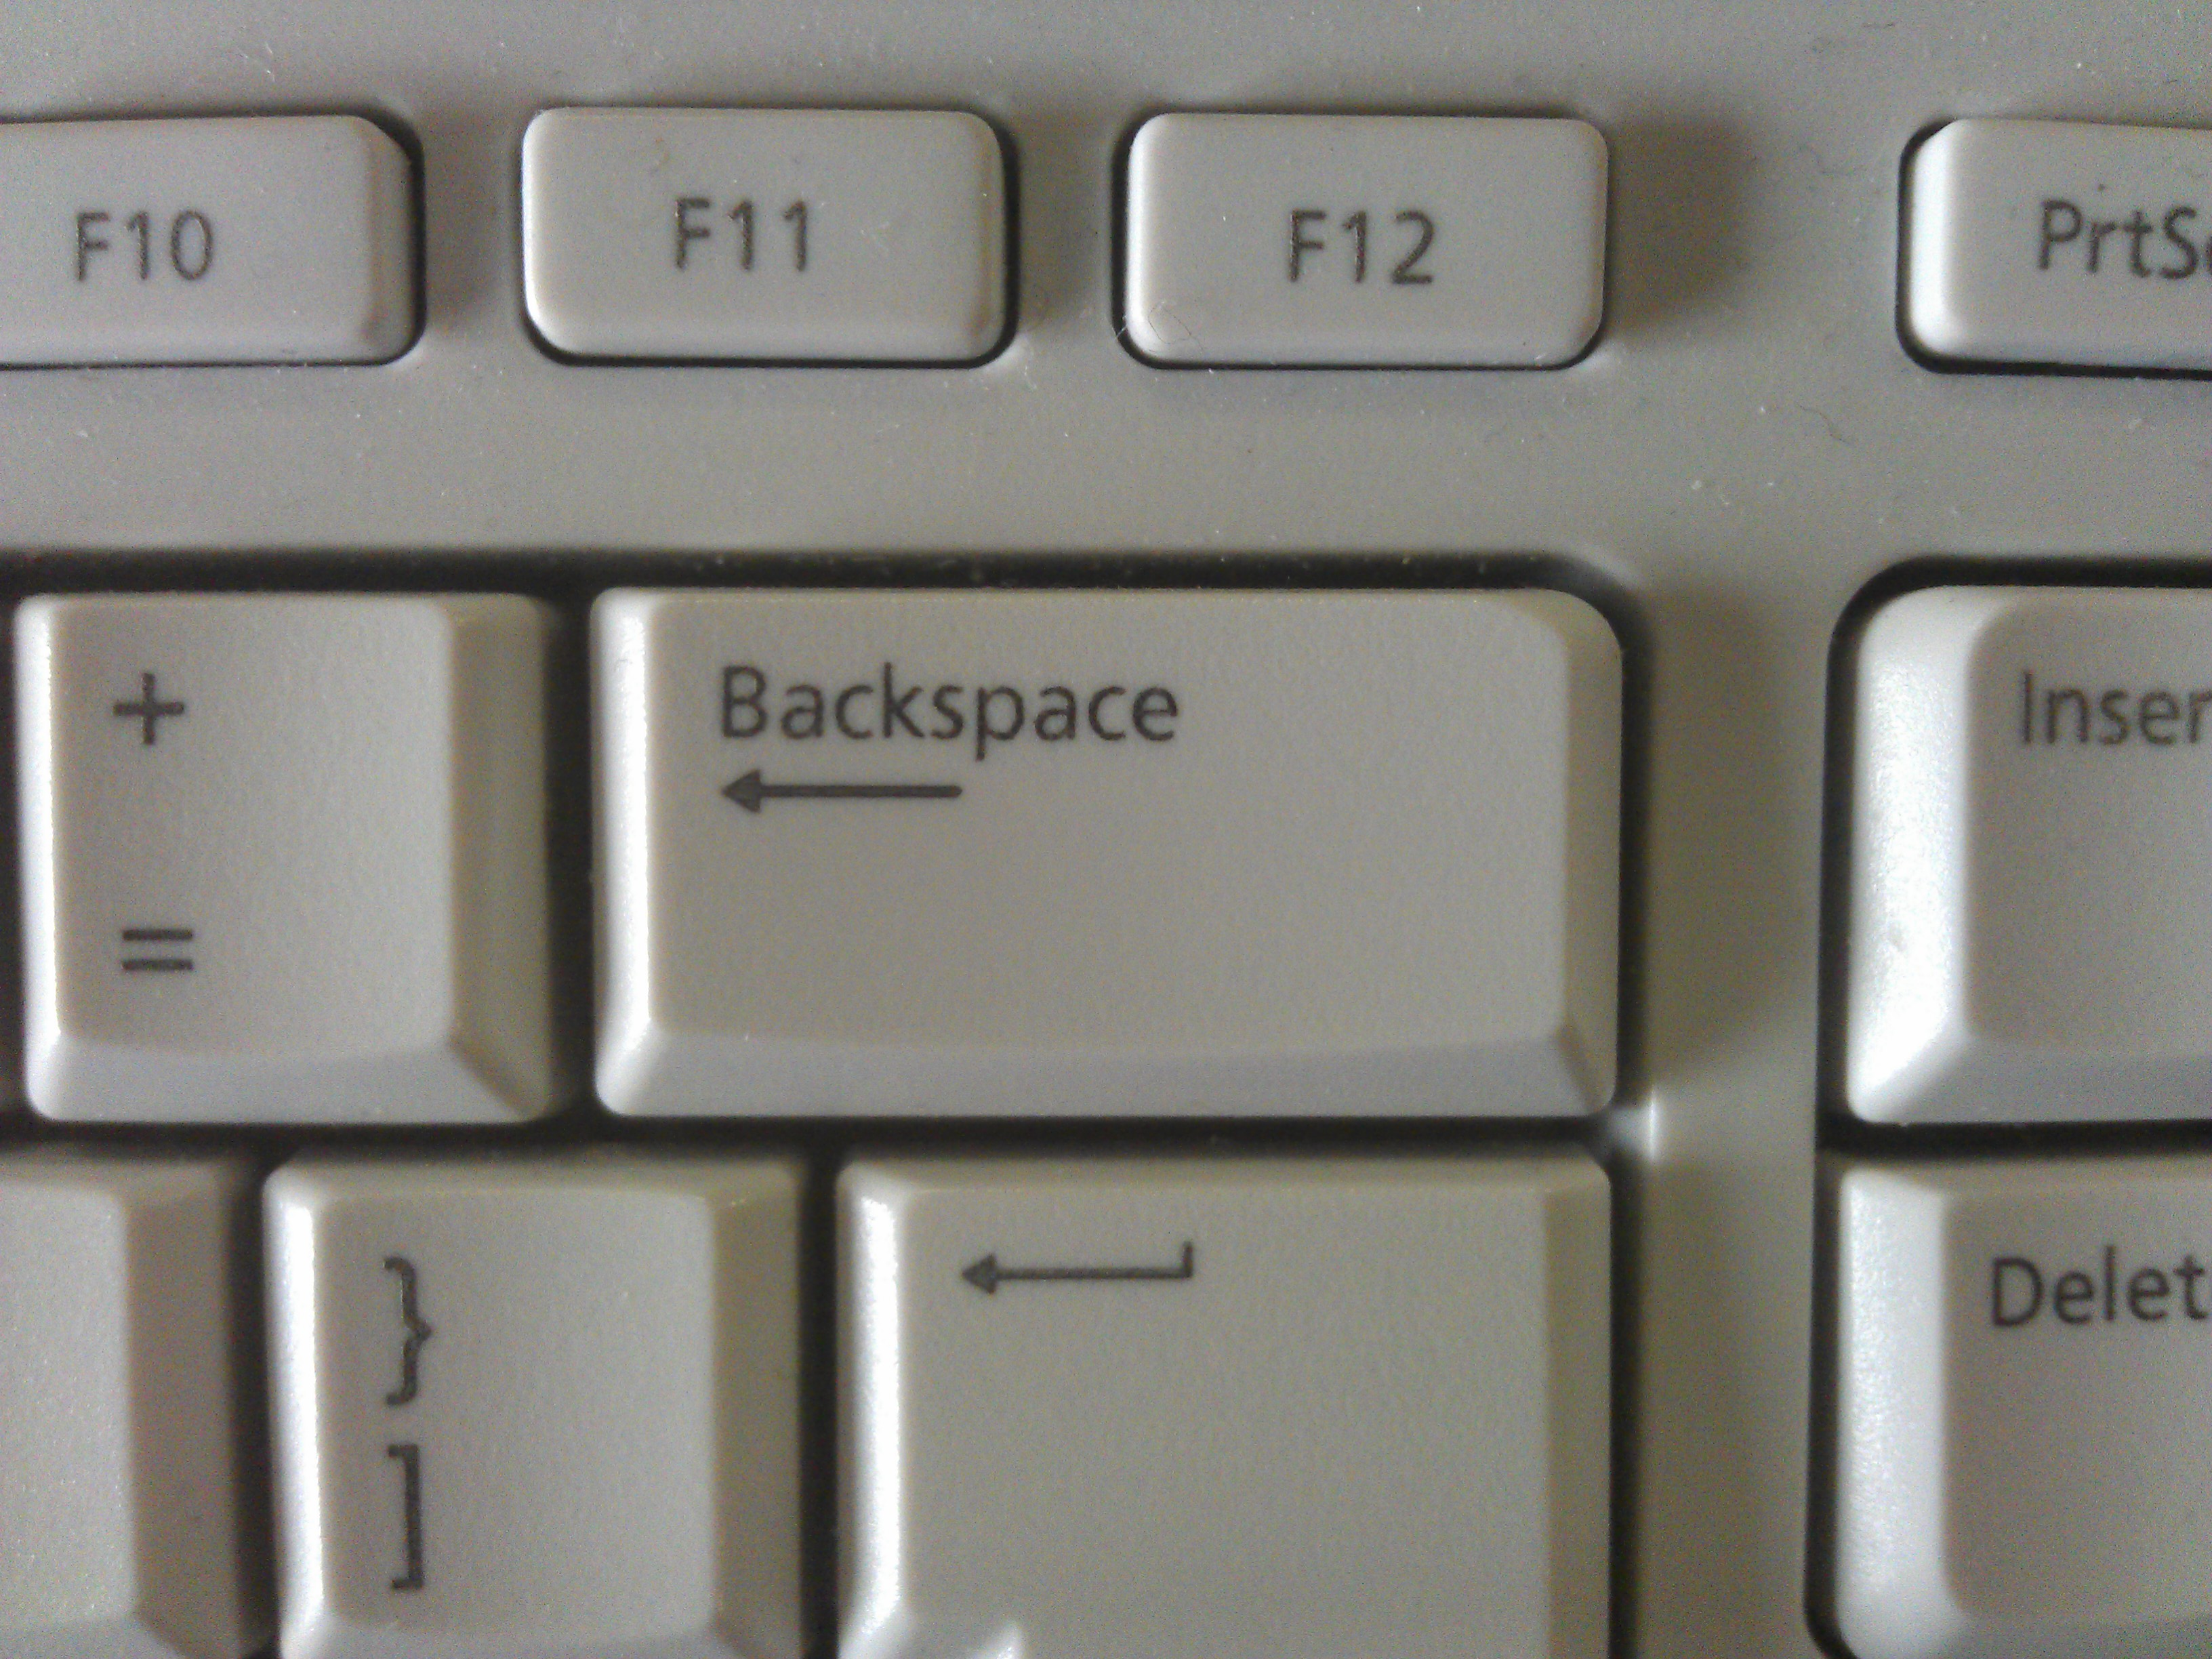 A keyboard with a crossed-out symbol or a keyboard not functioning properly.